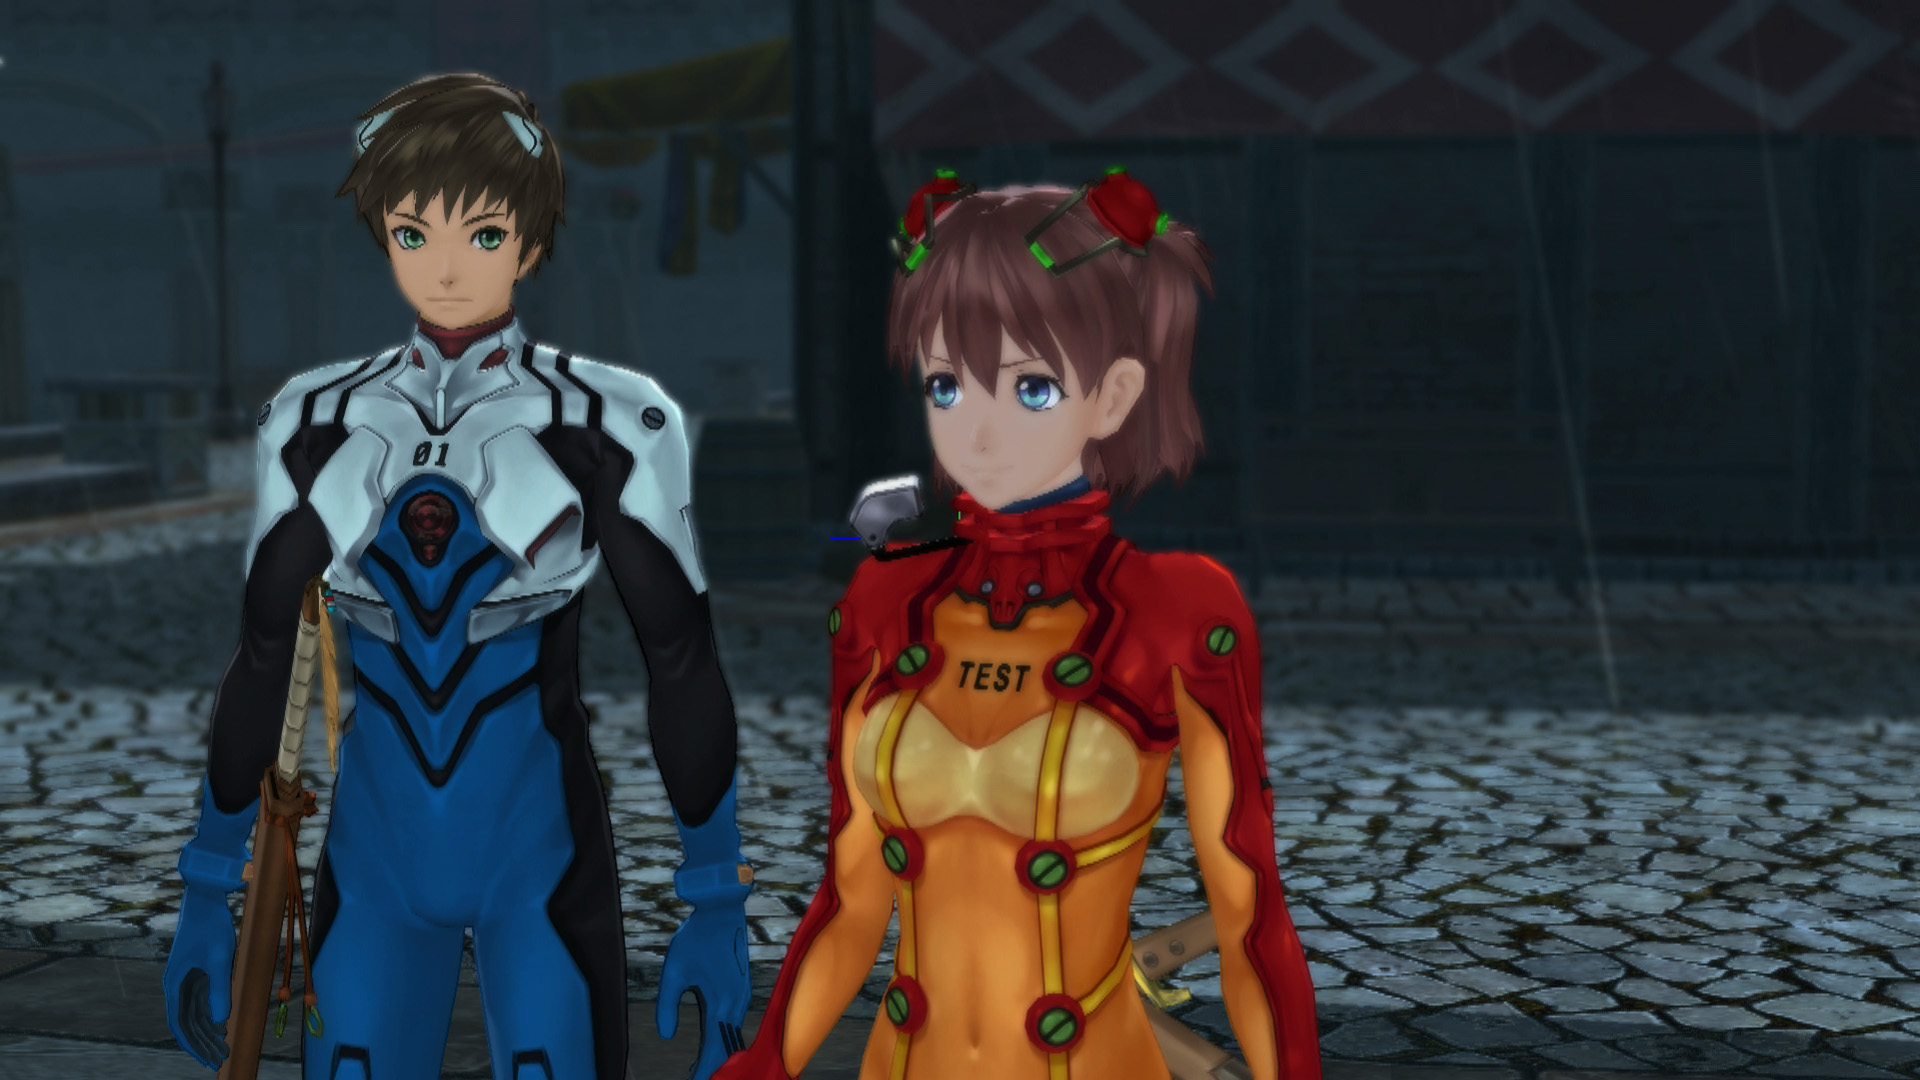 Tales of Zestiria - Attachments Set on Steam